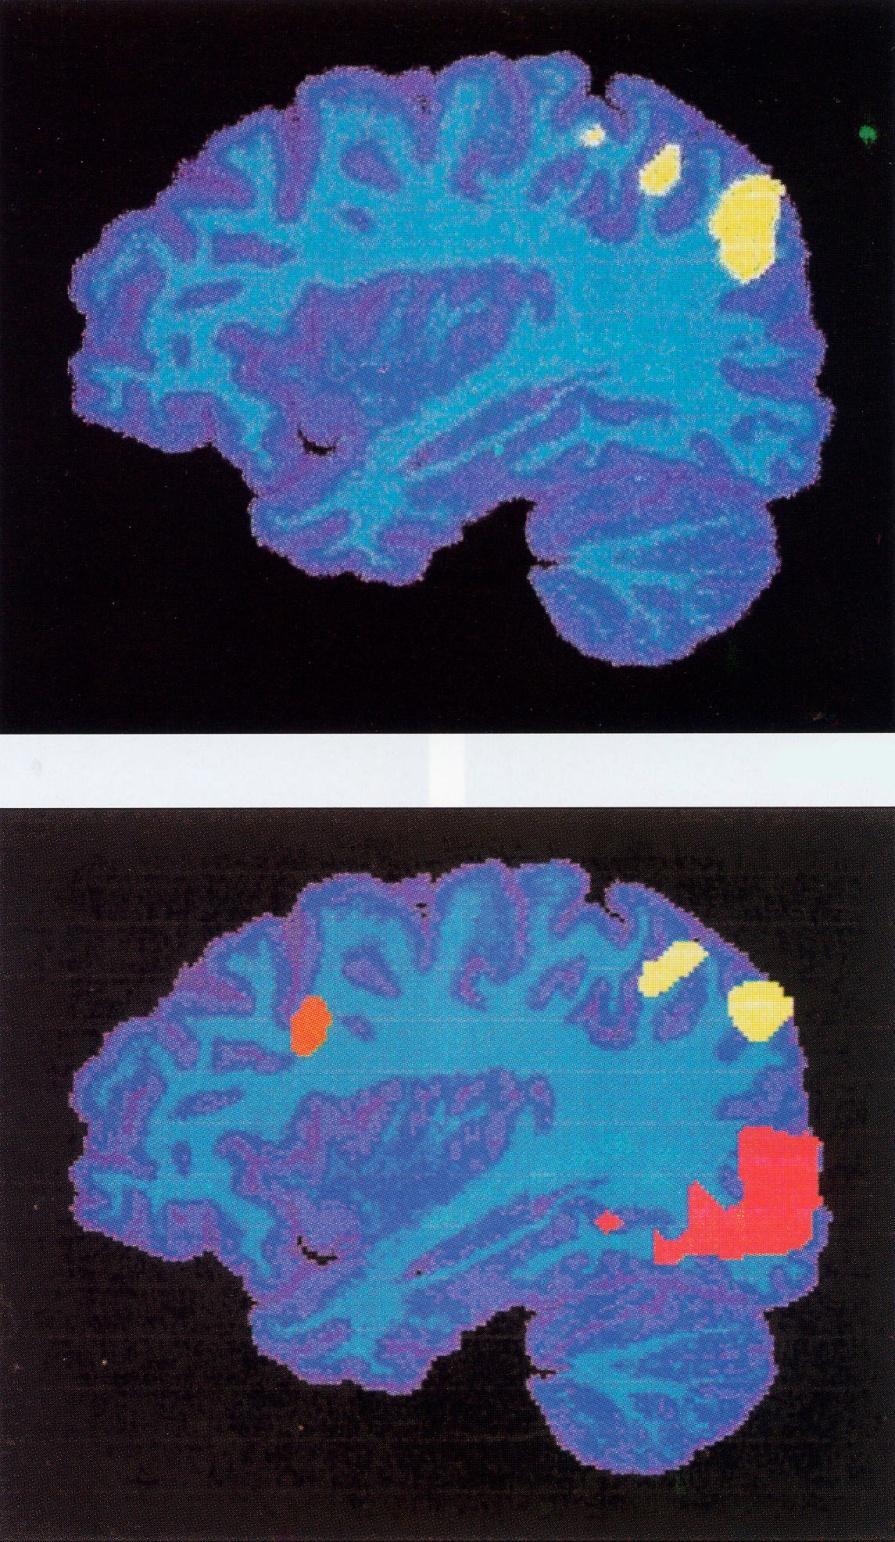 Mapping of brain function